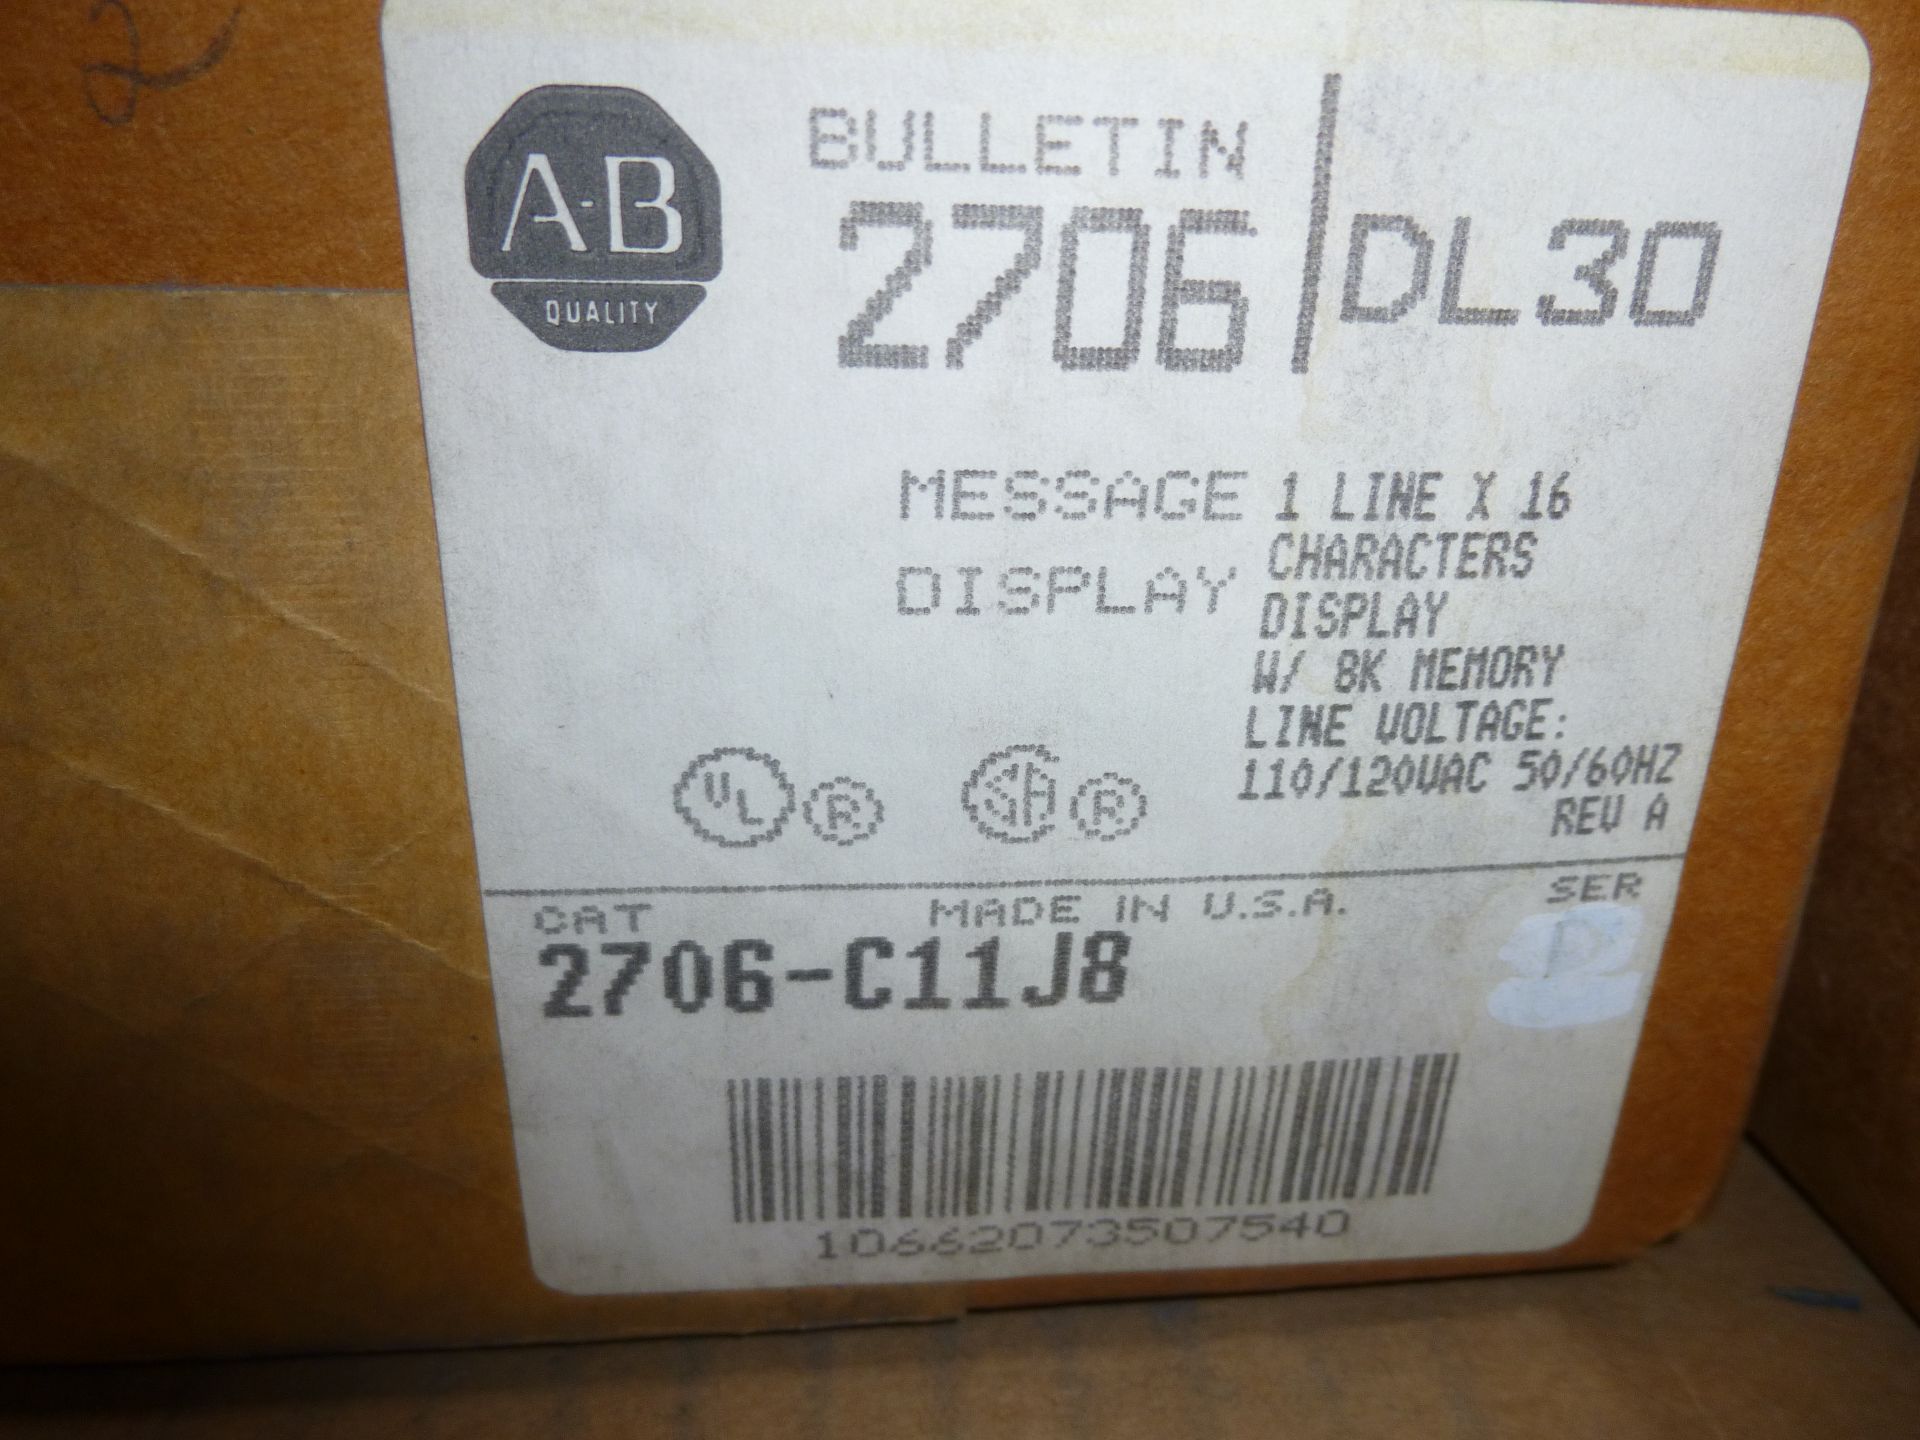 Allen Bradley Cat number 2706-C11J8, new in box, as always with Brolyn LLC auctions, all lots can be - Image 2 of 2